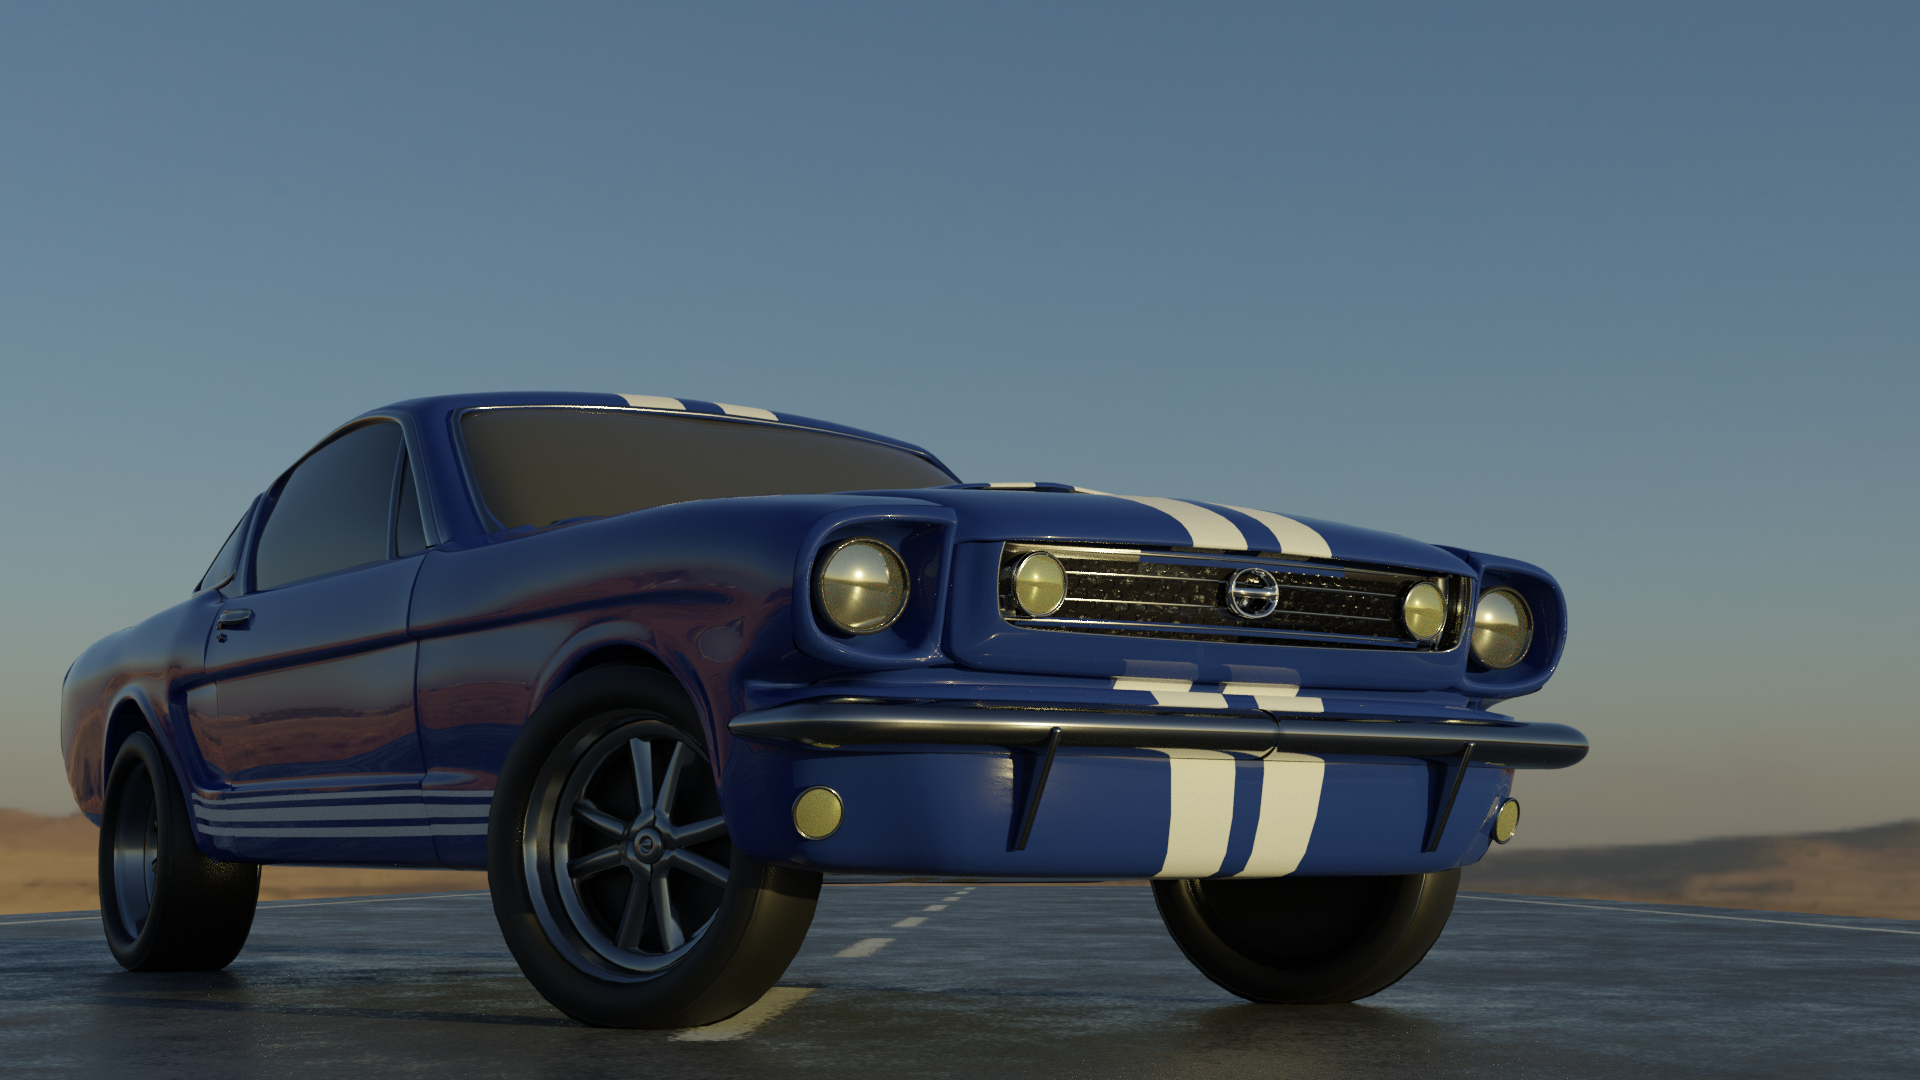 Blue and White Muscle Car preview image 1